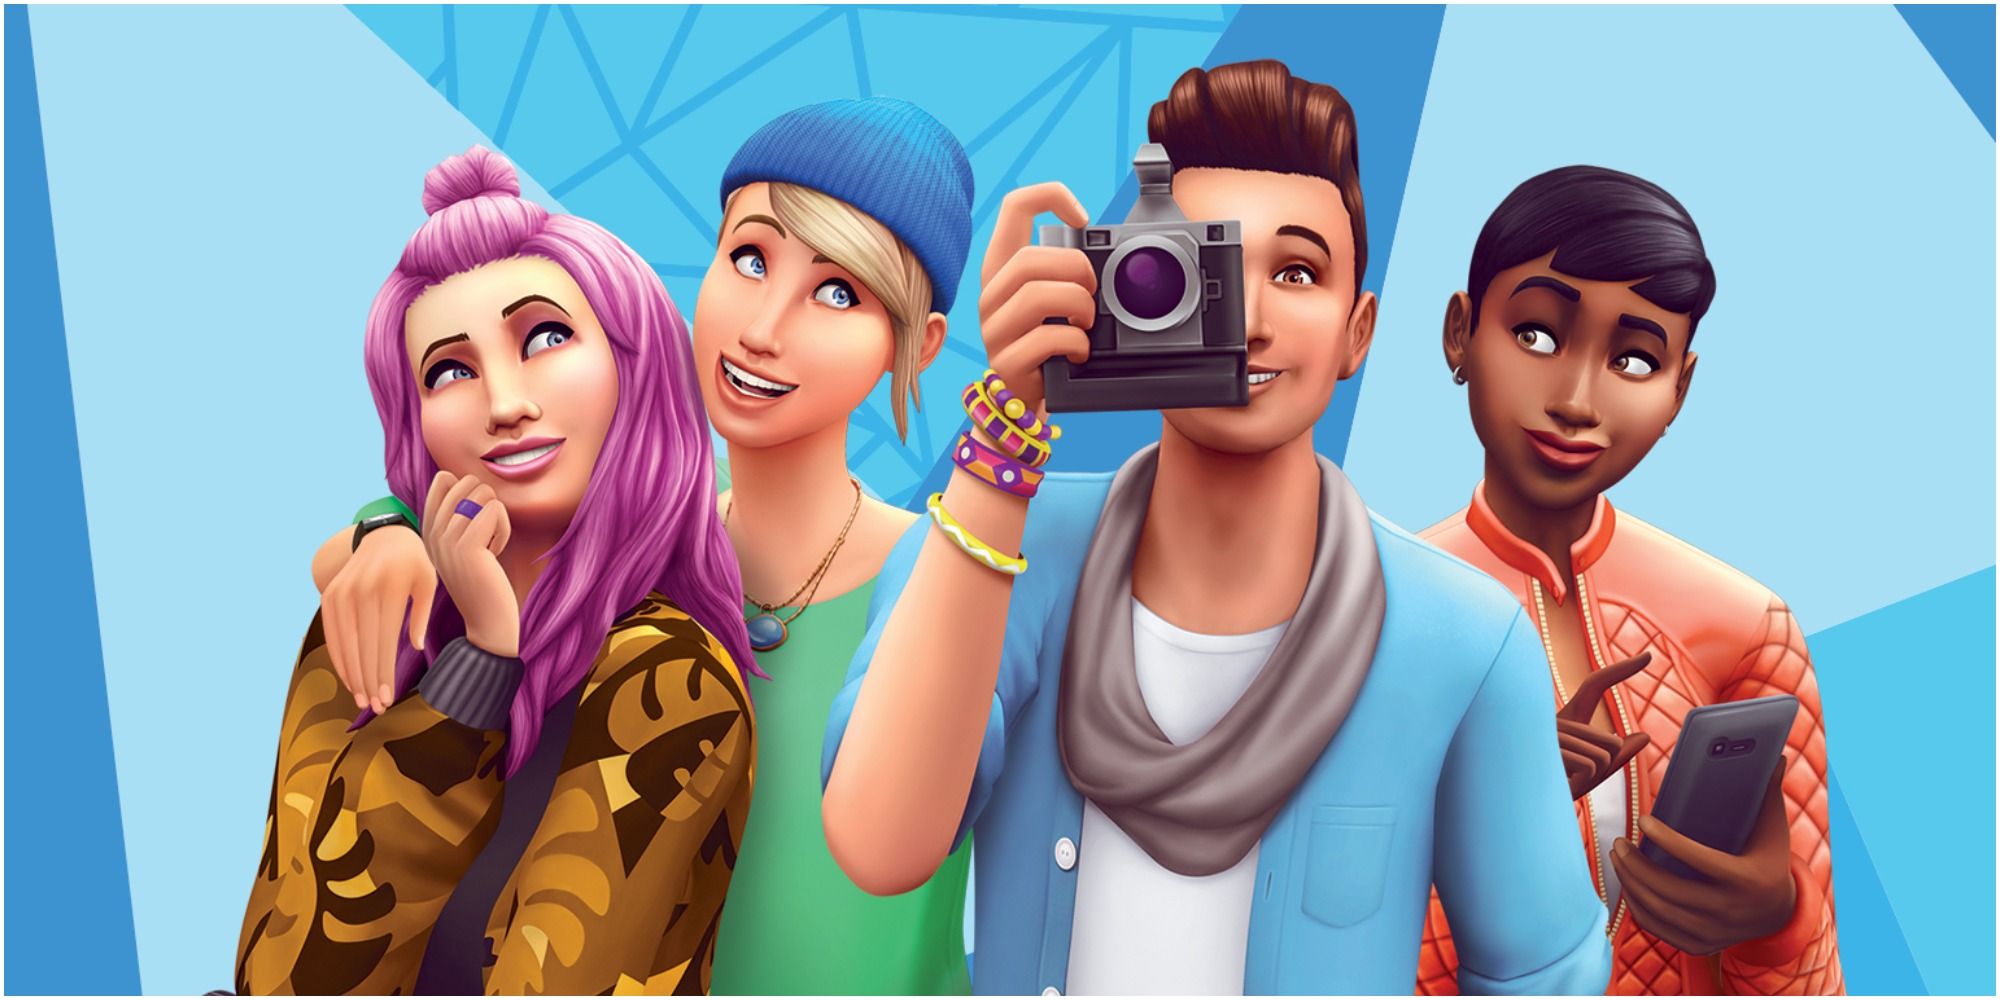 A promotional image of several characters from The Sims 4